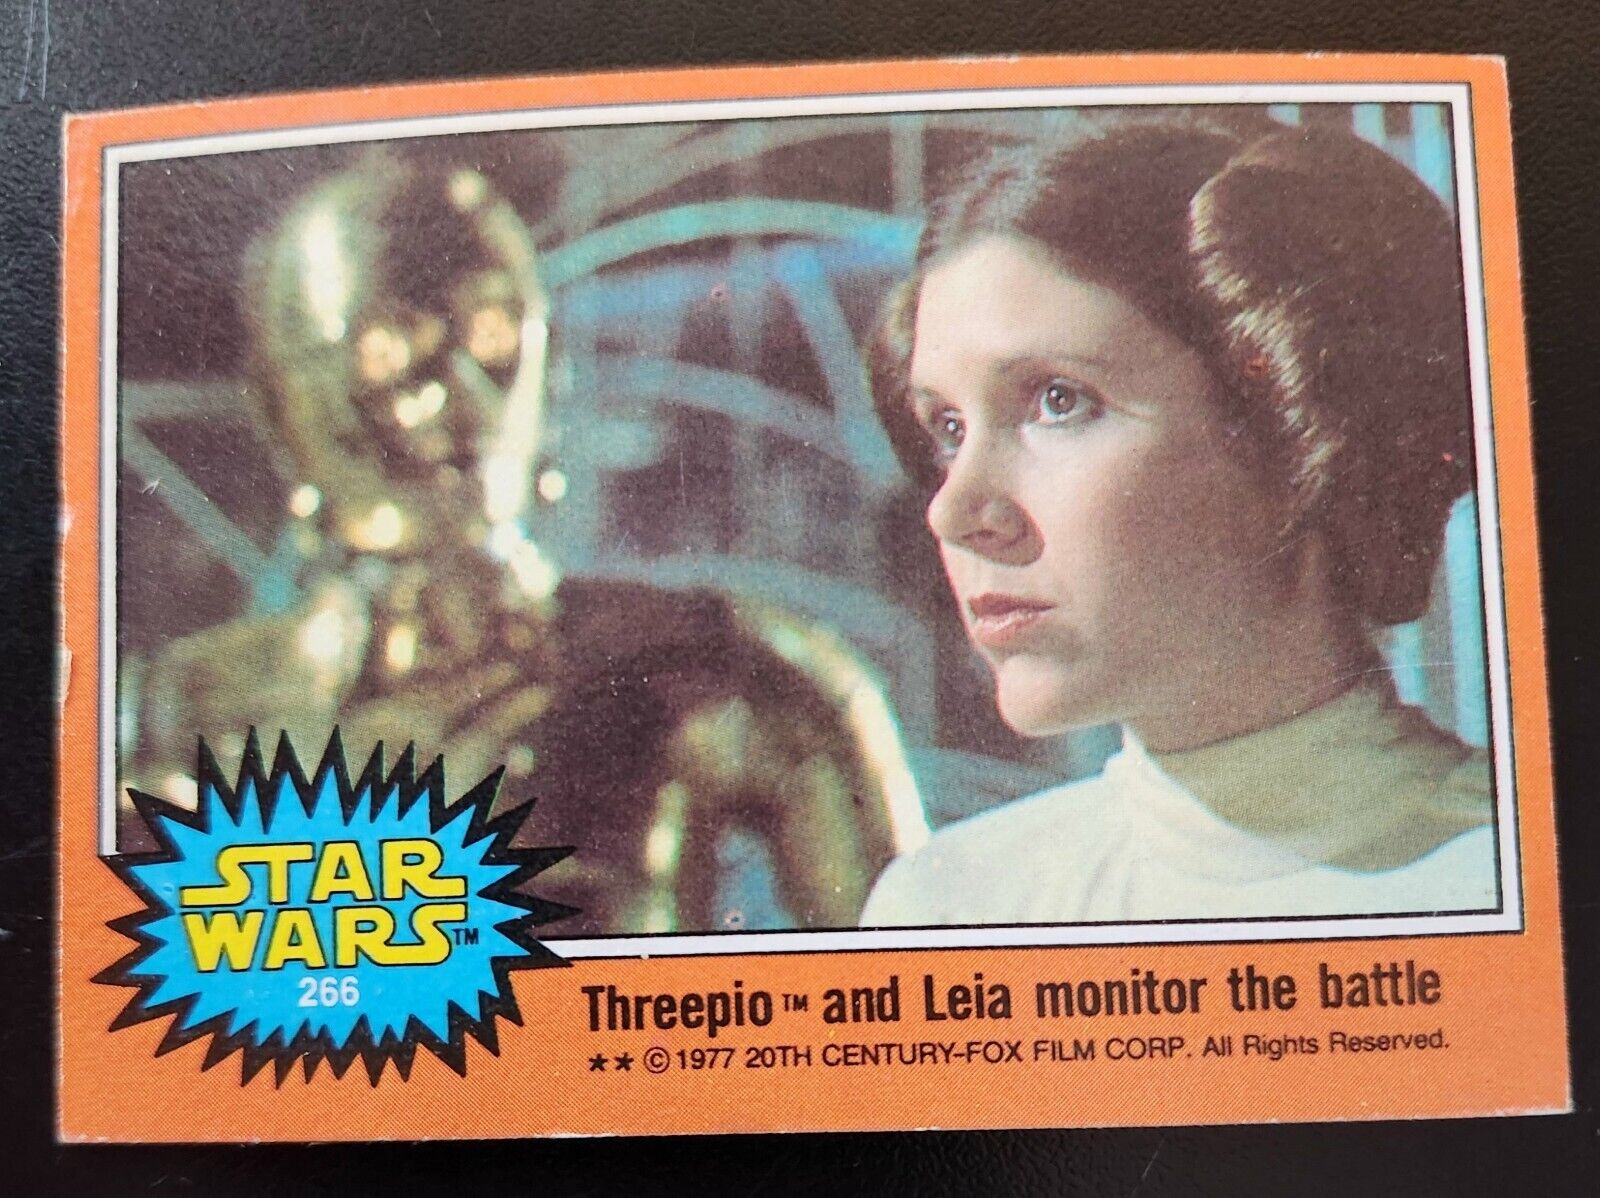 1977 STAR WARS TOPPS Trading Cards Orange Series 5 Your Choice 66 Cards U Pick